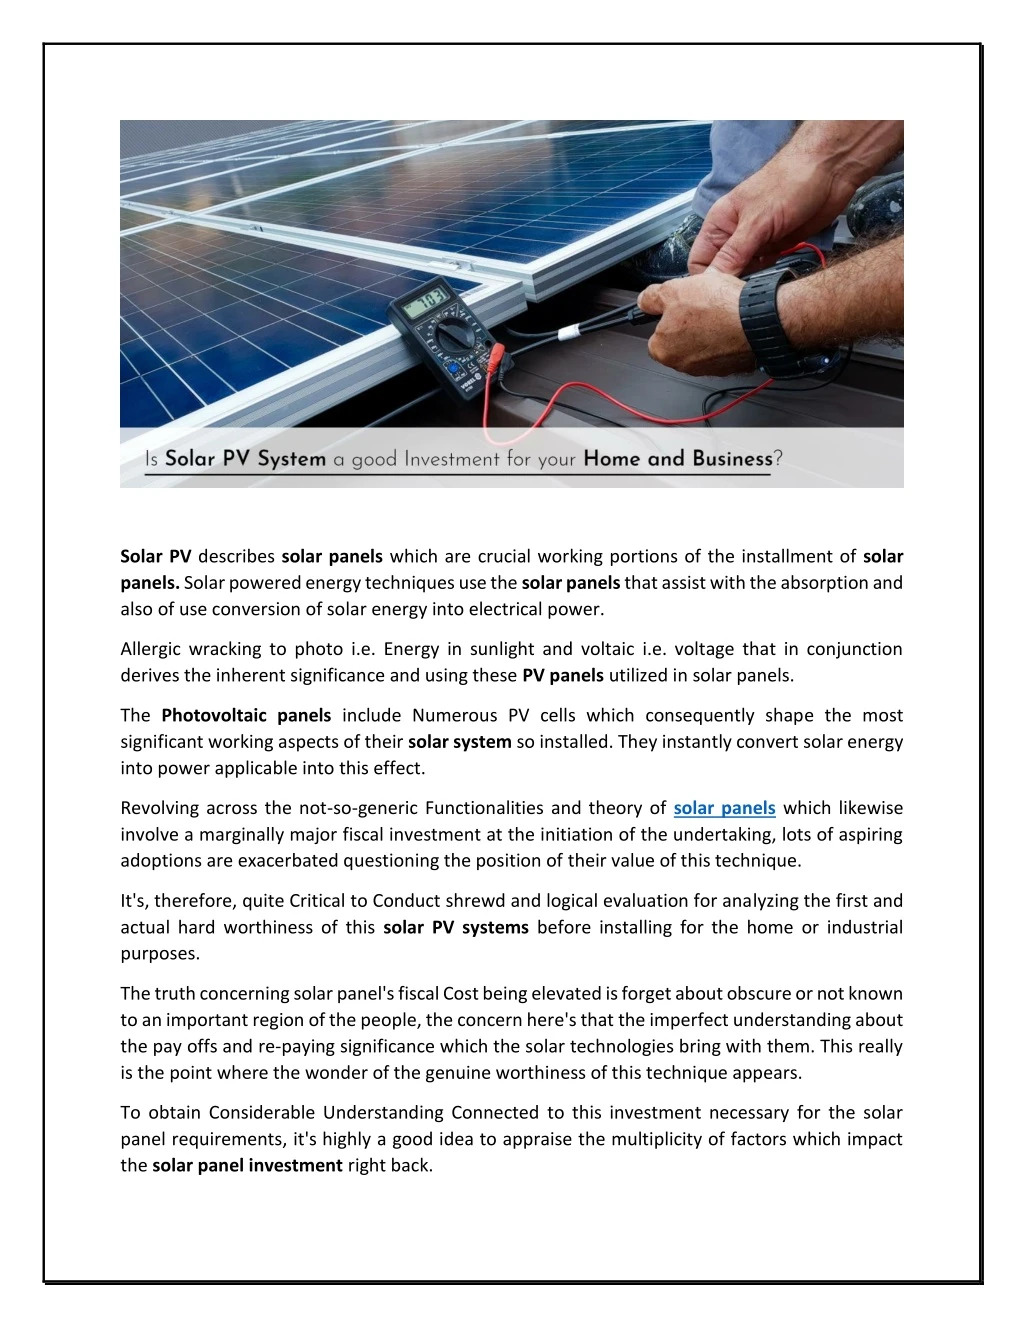 solar pv describes solar panels which are crucial